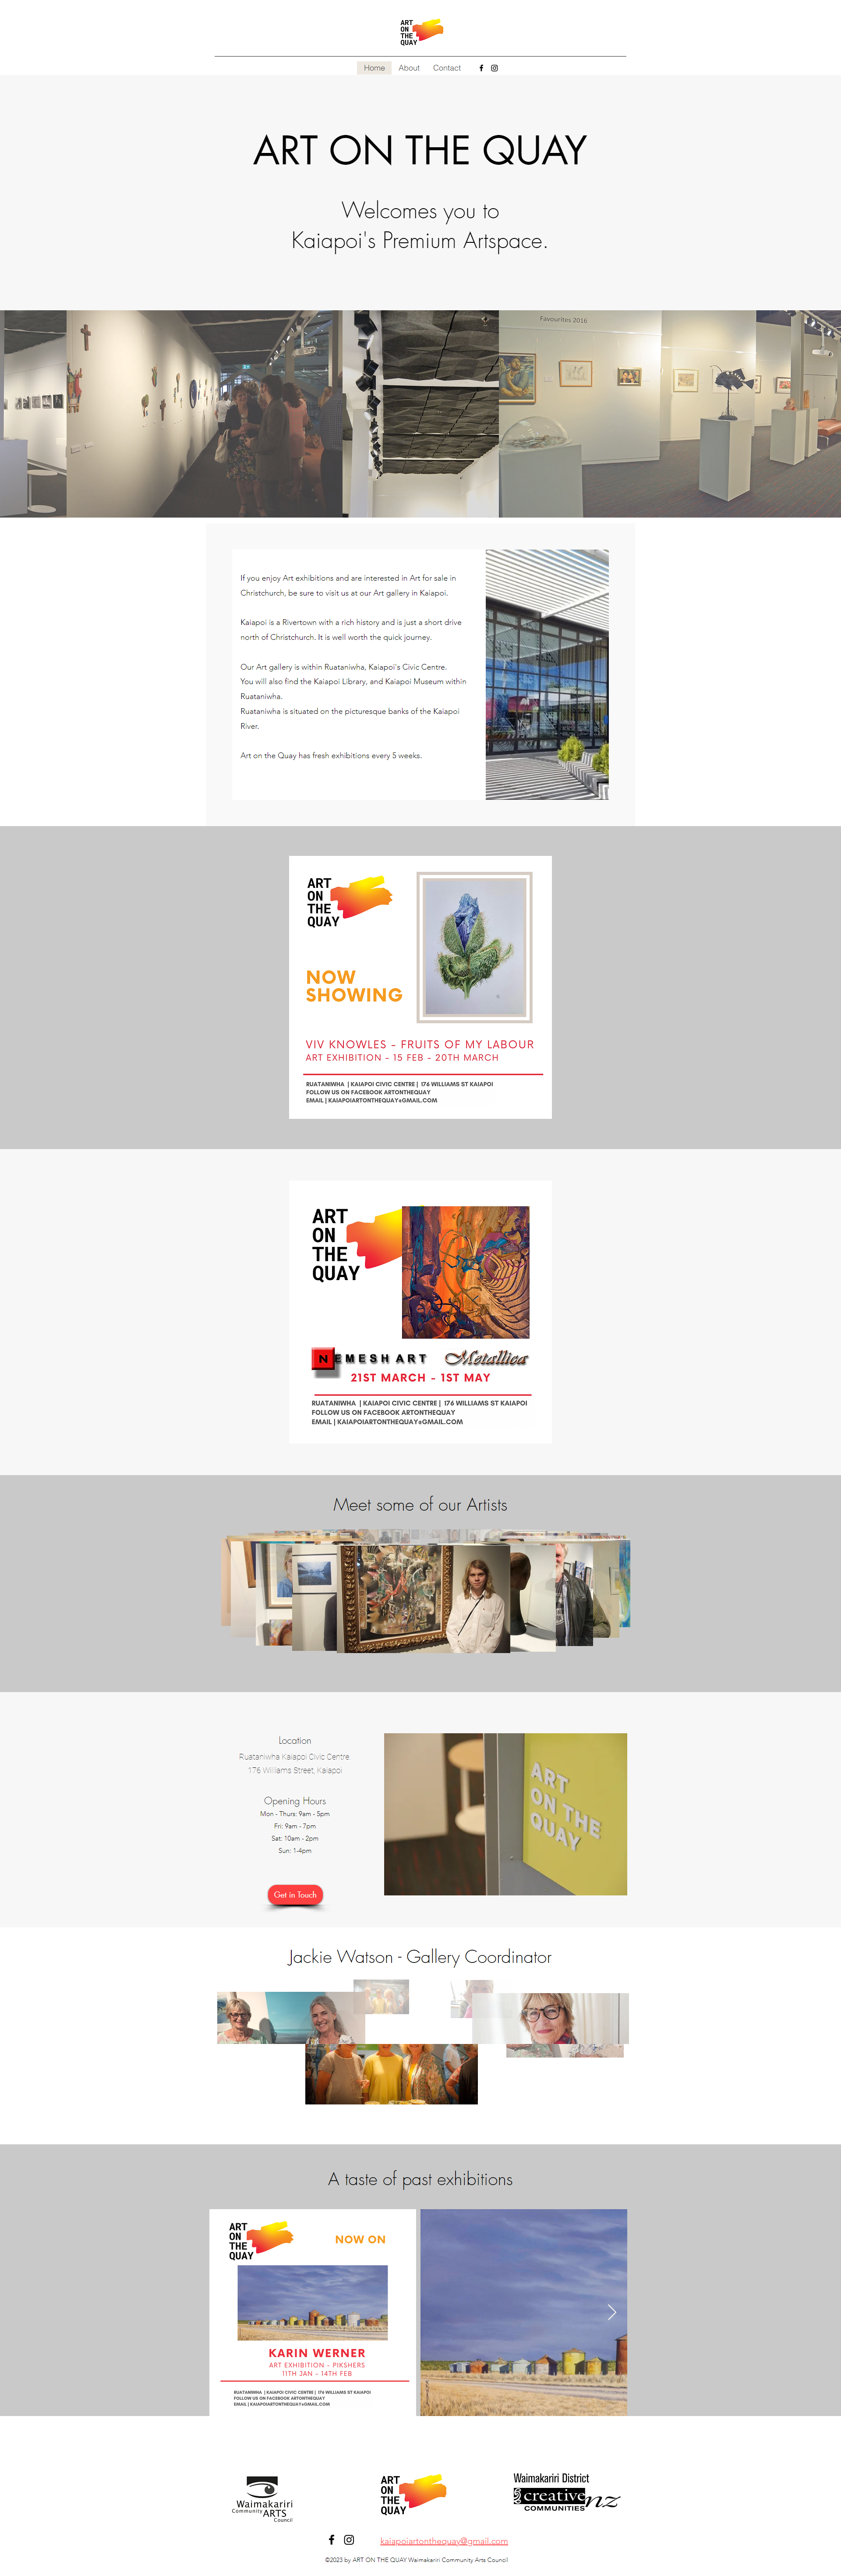 Home Page screen capture of Art on the Quay website